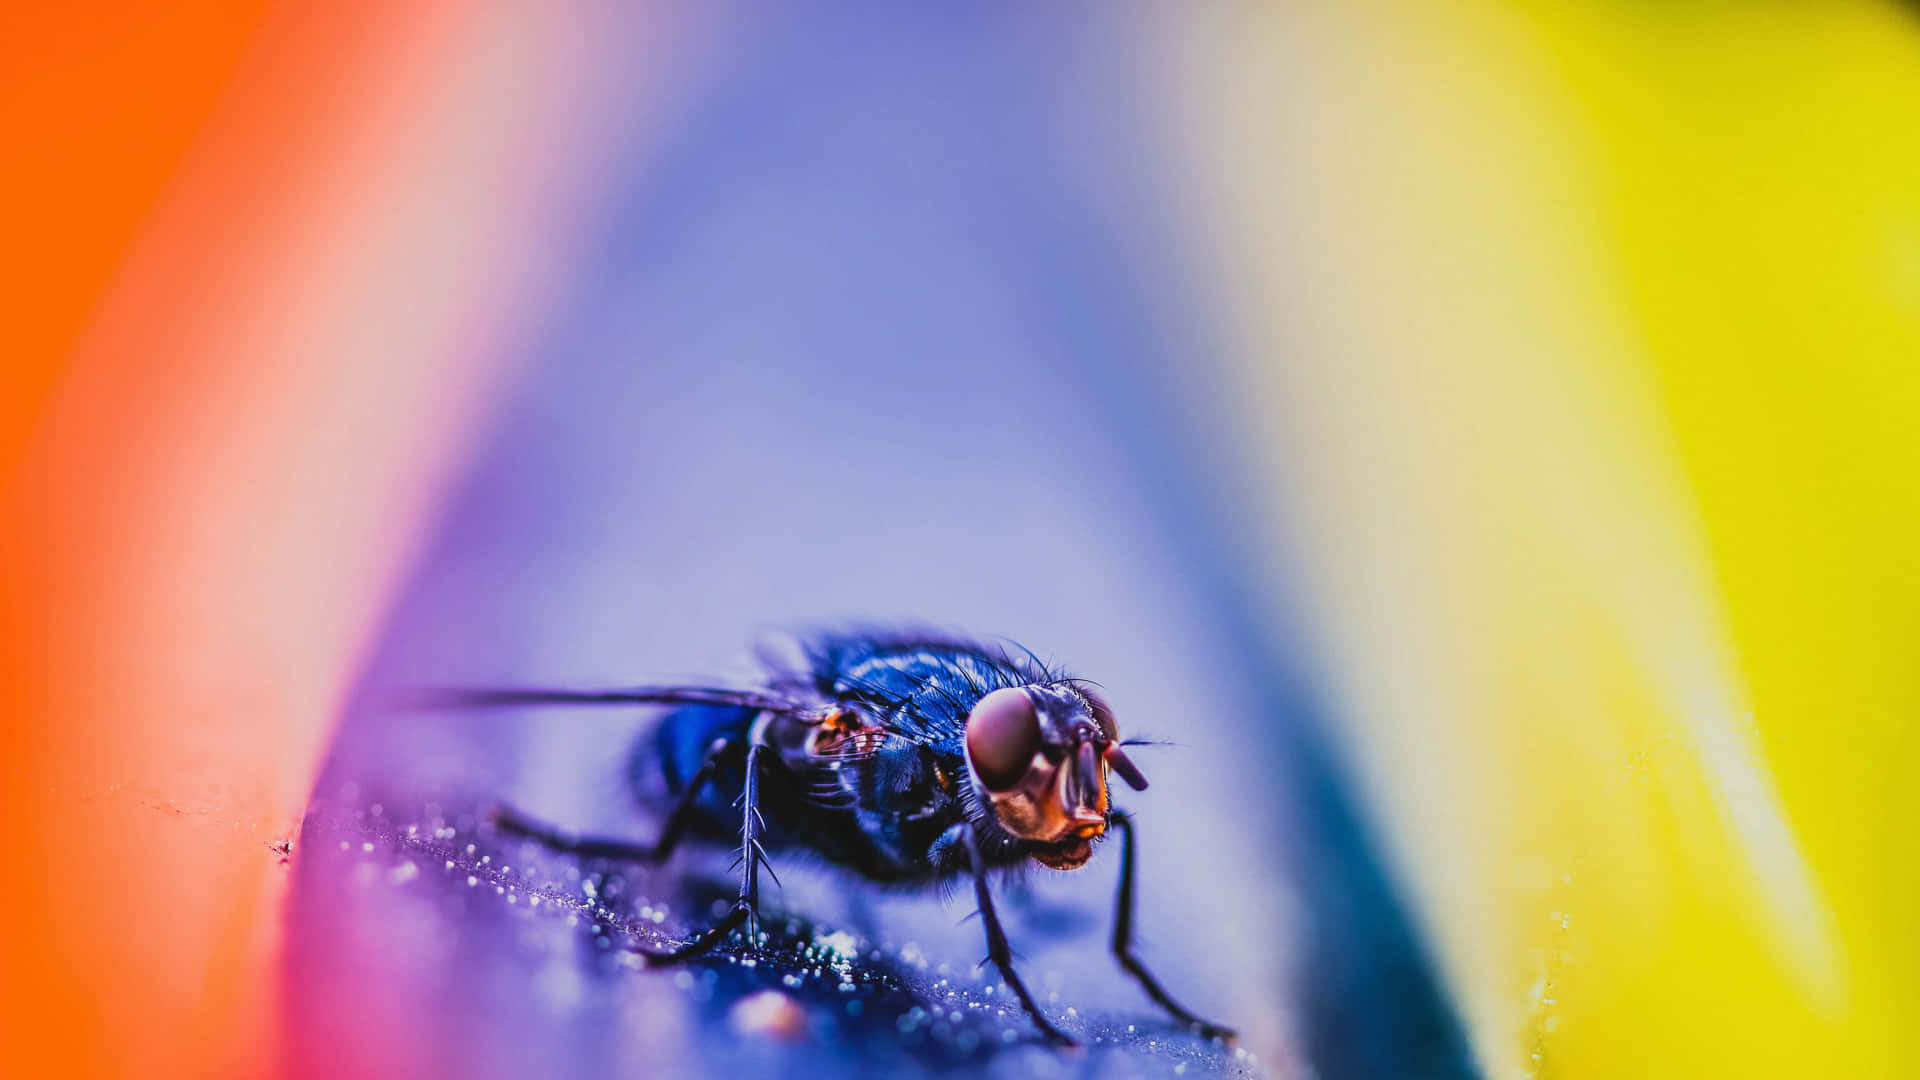 Stunning Close-up Of A 4k Insect Wallpaper